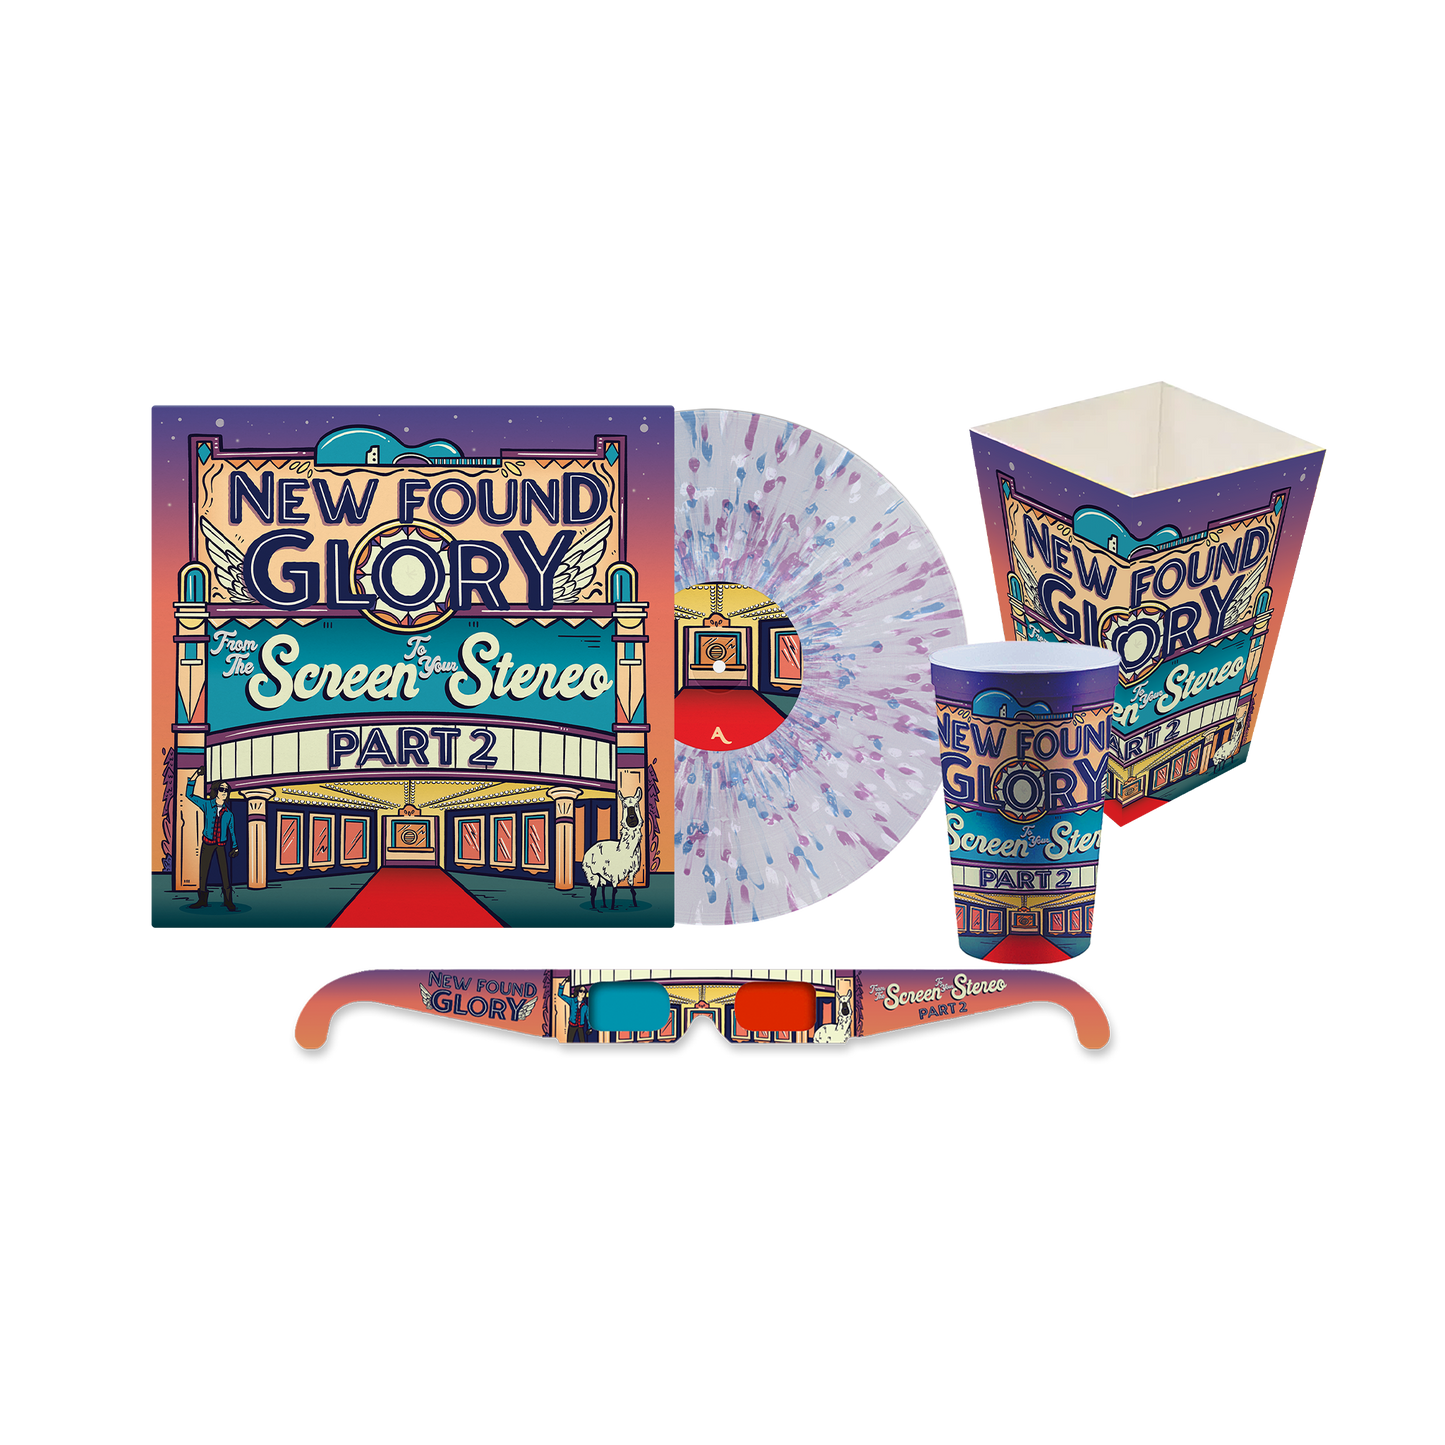 New Found Glory - From The Screen To Your Stereo Part 2 - Collector's Bundle